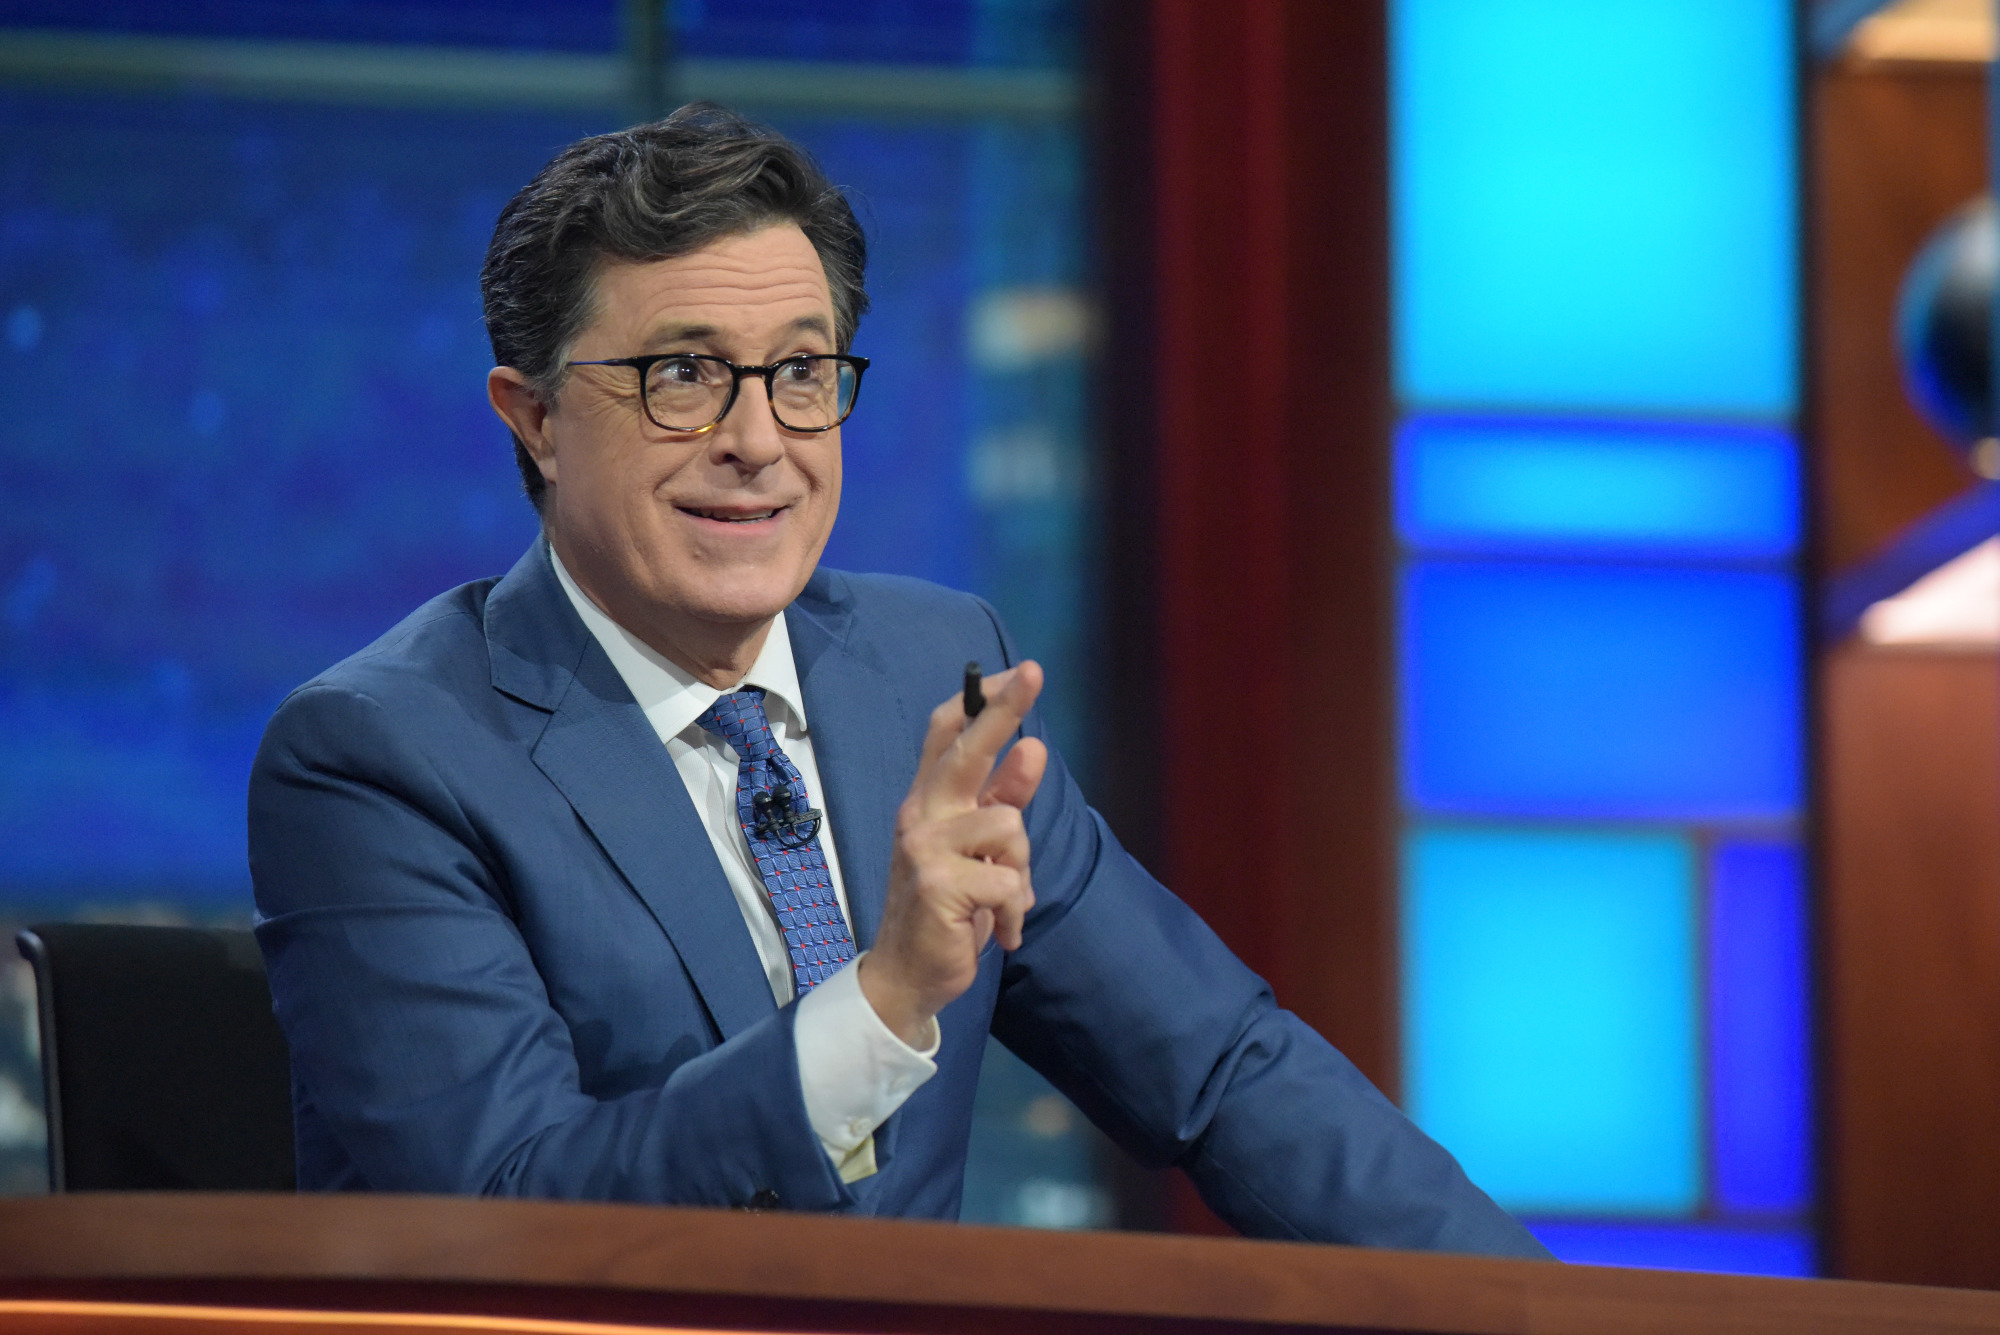 NEW YORK - OCTOBER 19: The Late Show with Stephen Colbert during Wednesday 's 10/19/16 taping in New York. (Photo by Scott Kowalchyk/CBS via Getty Images)